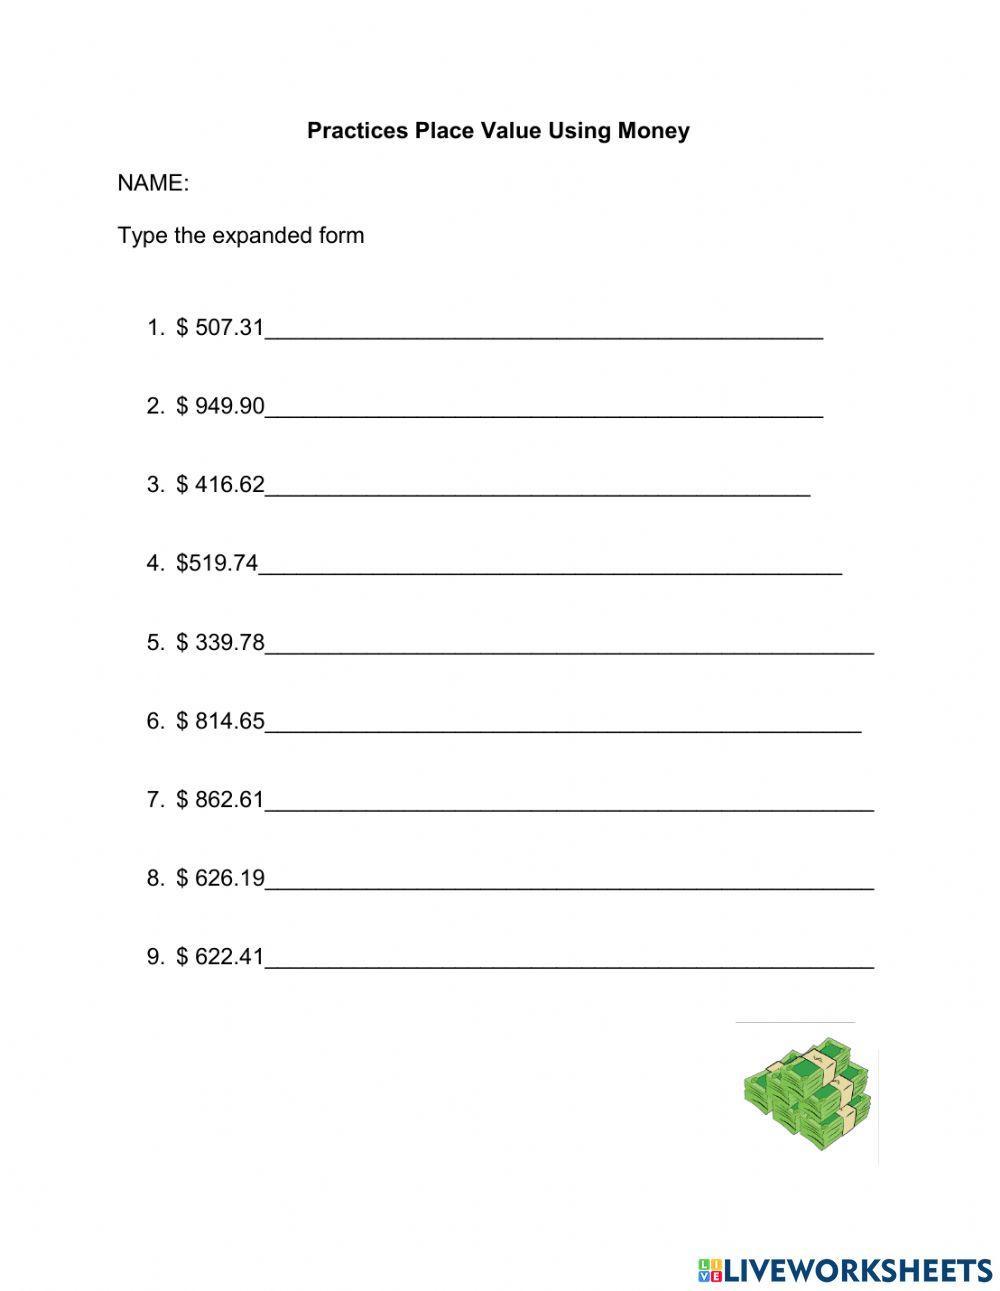 Practices Place Value Using Money